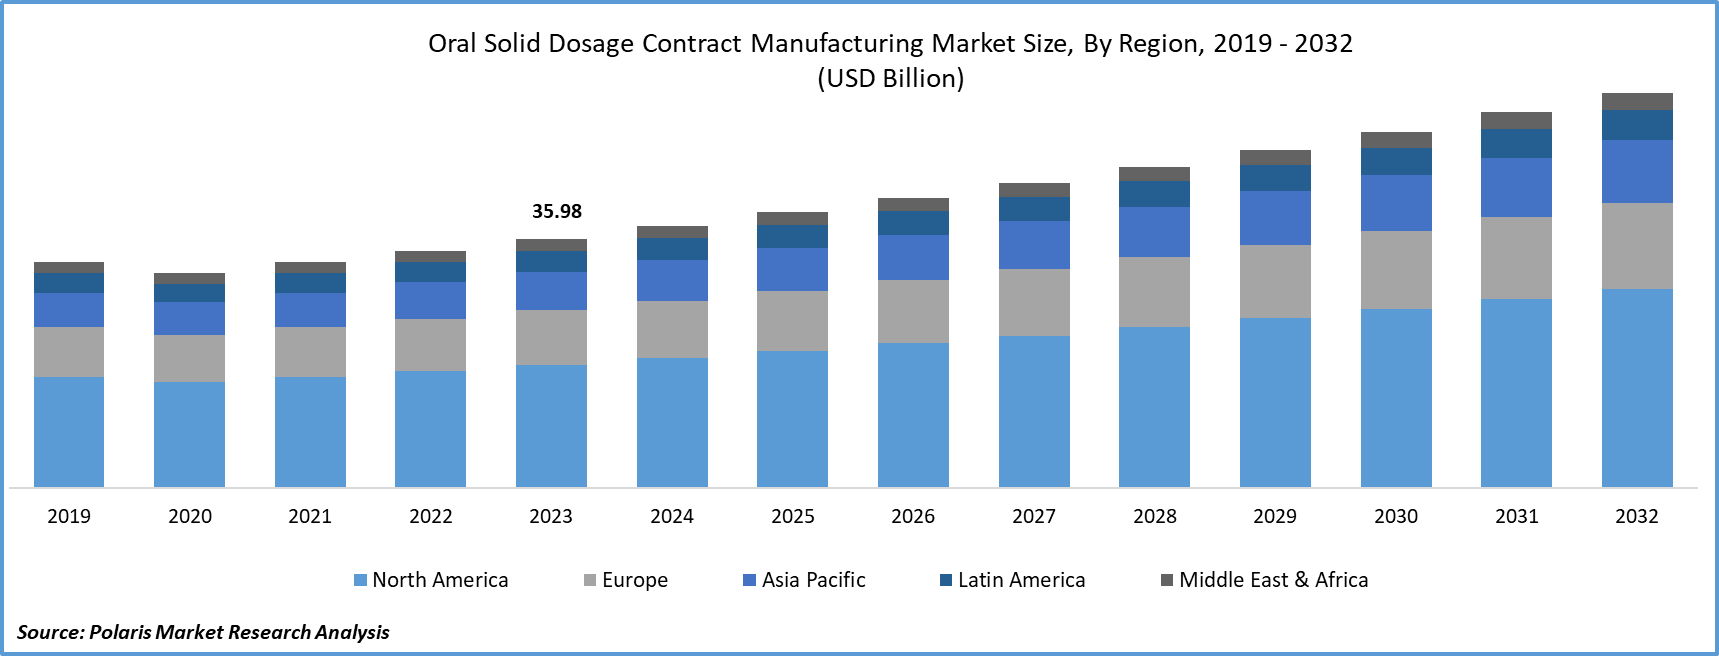 Oral Solid Dosage Contract Manufacturing Market Size